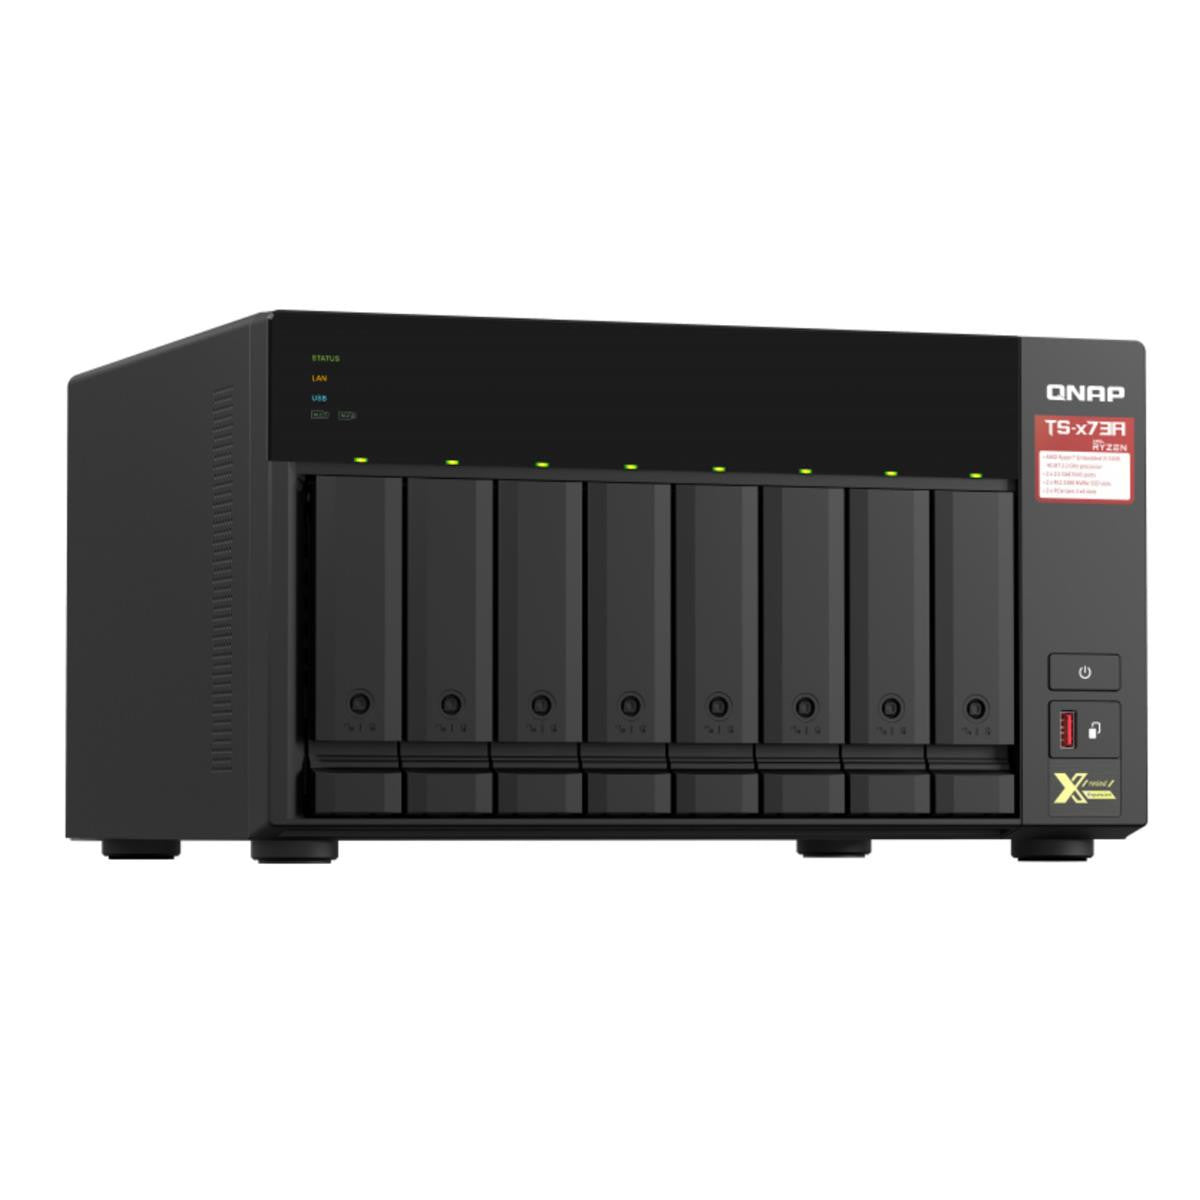 QNAP TS-873A 8-BAY NAS with 32GB DDR4 RAM and 96TB (8x12TB) Seagate Ironwolf NAS Drives Fully Assembled and Tested